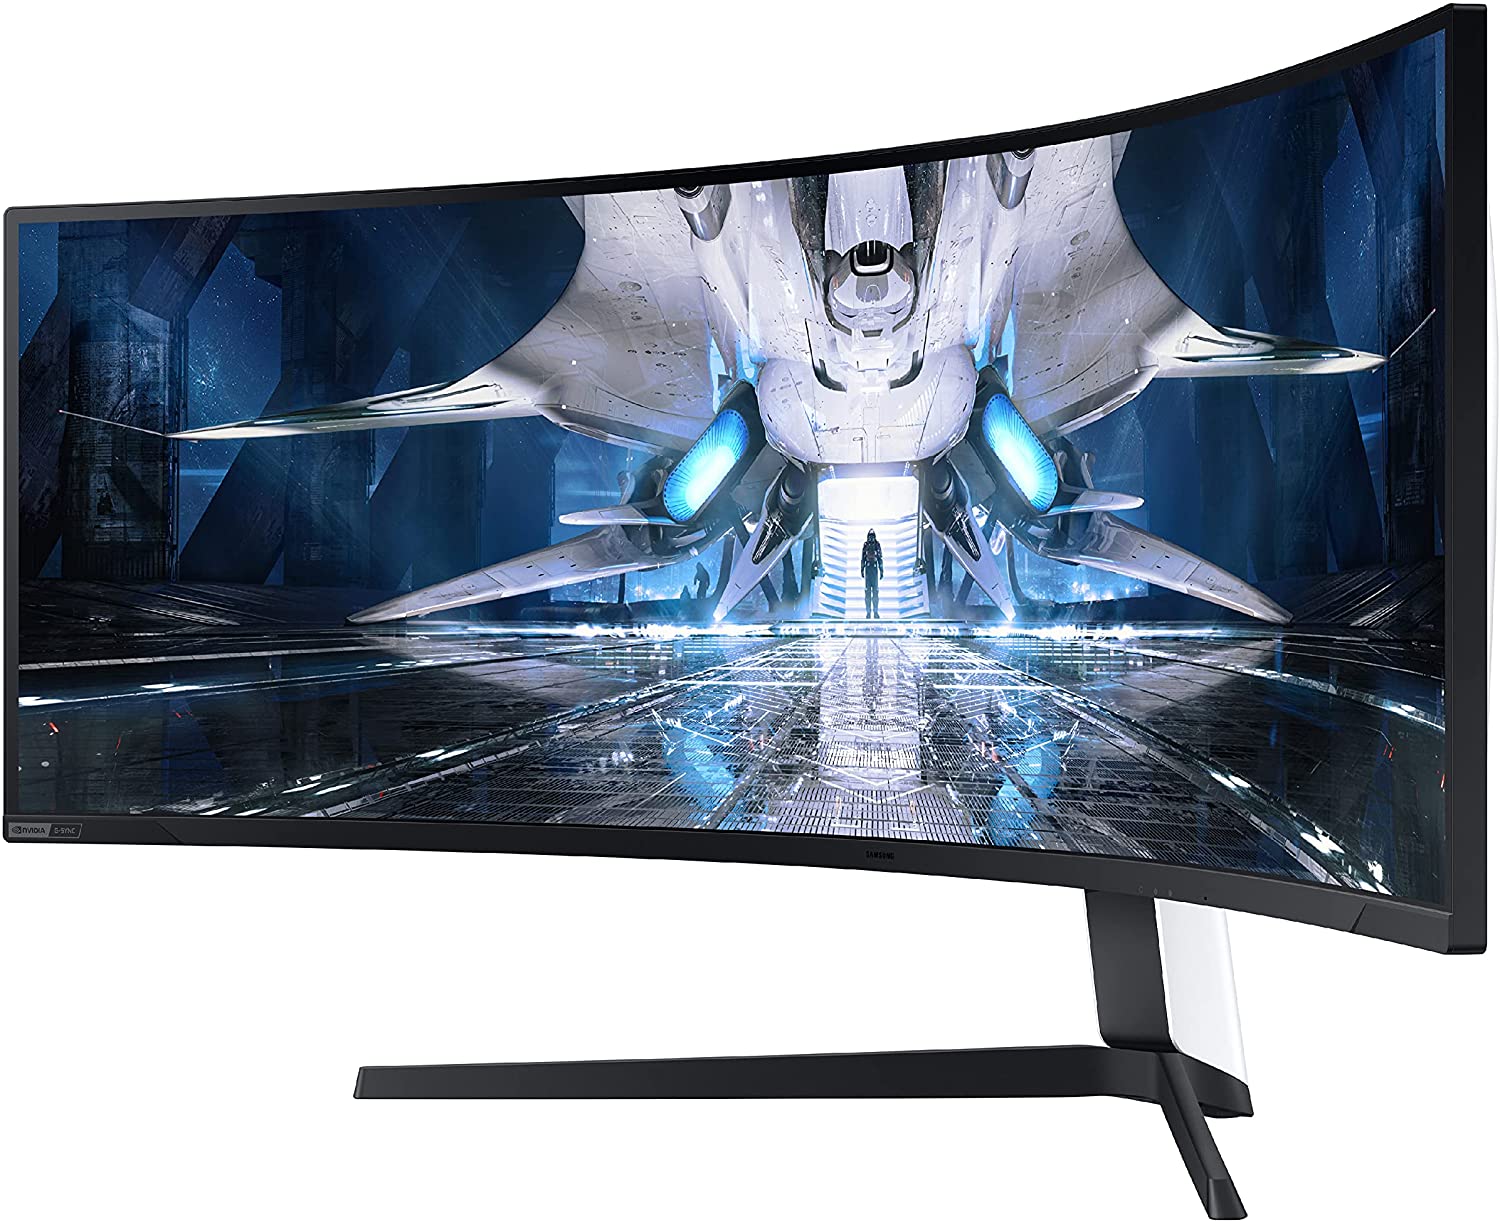 Samsung's Odyssey OLED G9 gaming monitor gets a $500 discount